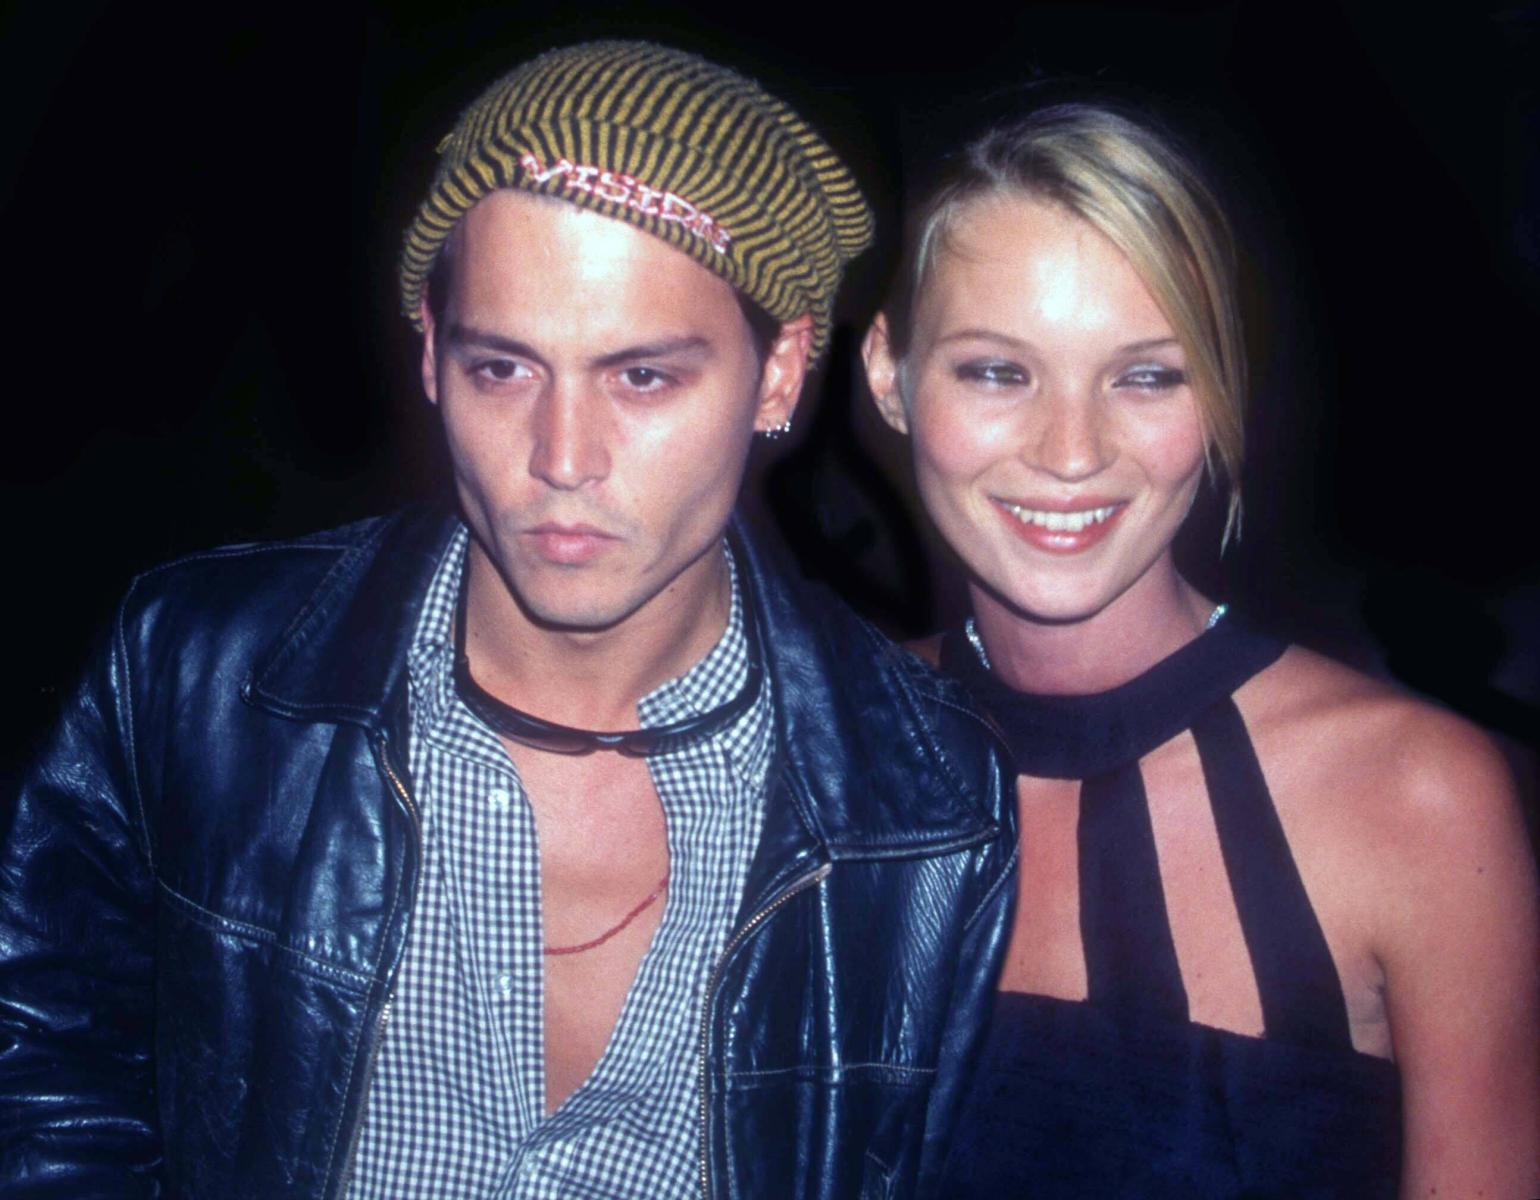 Was There Violence in Johnny Depp and Kate Moss Relationship? - image 1